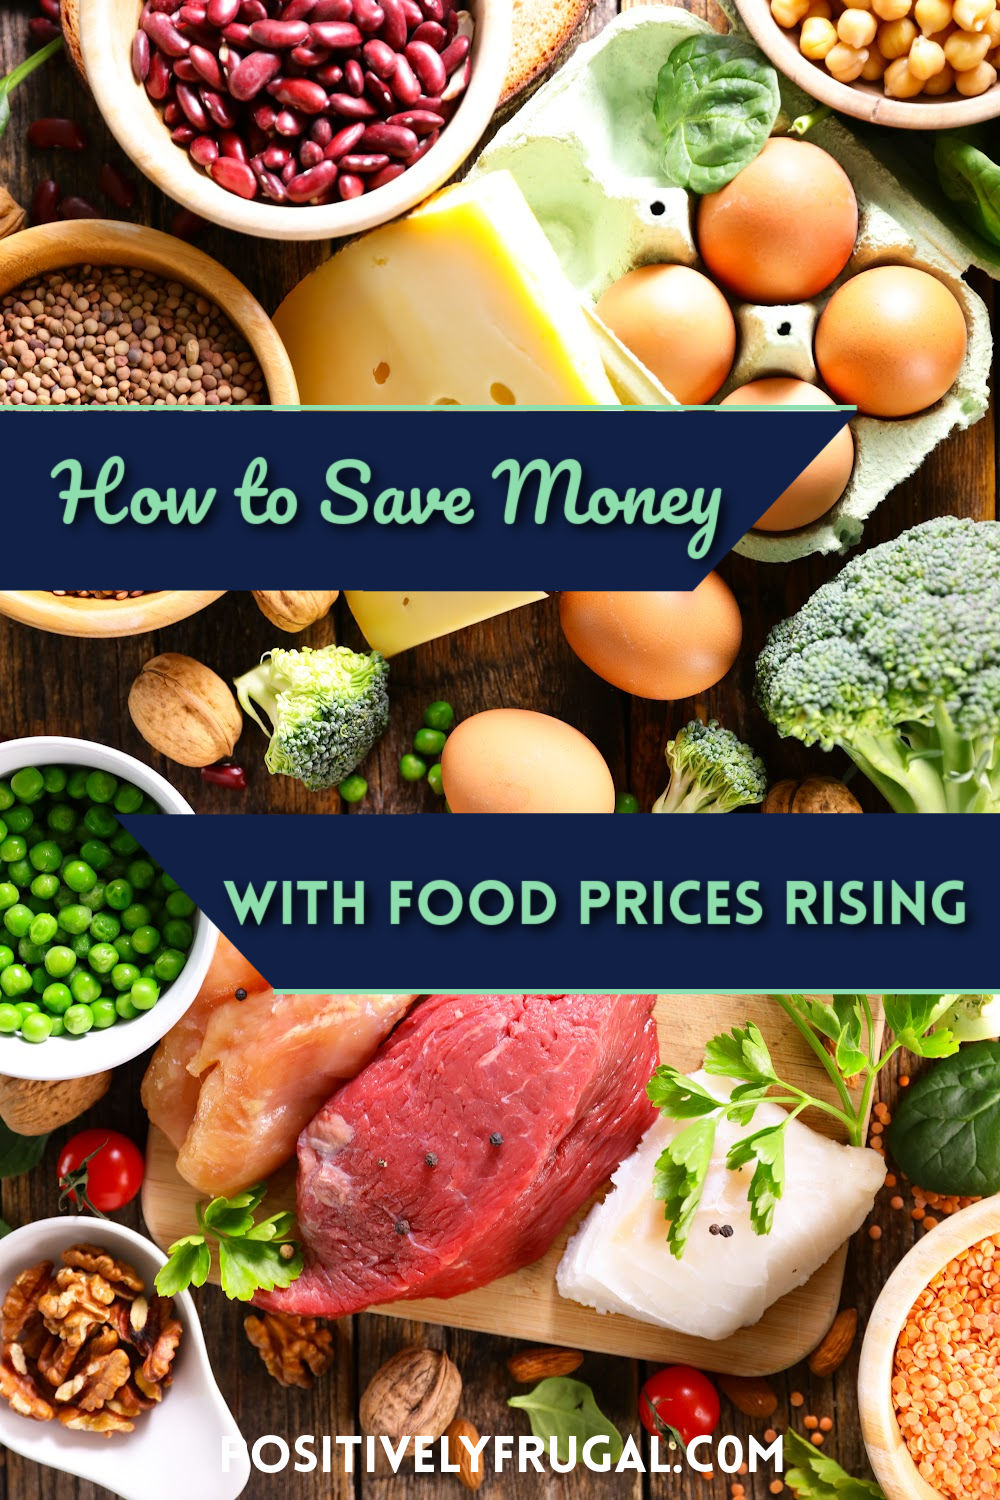 How To Save Money with Food Prices Rising by PositivelyFrugal.com